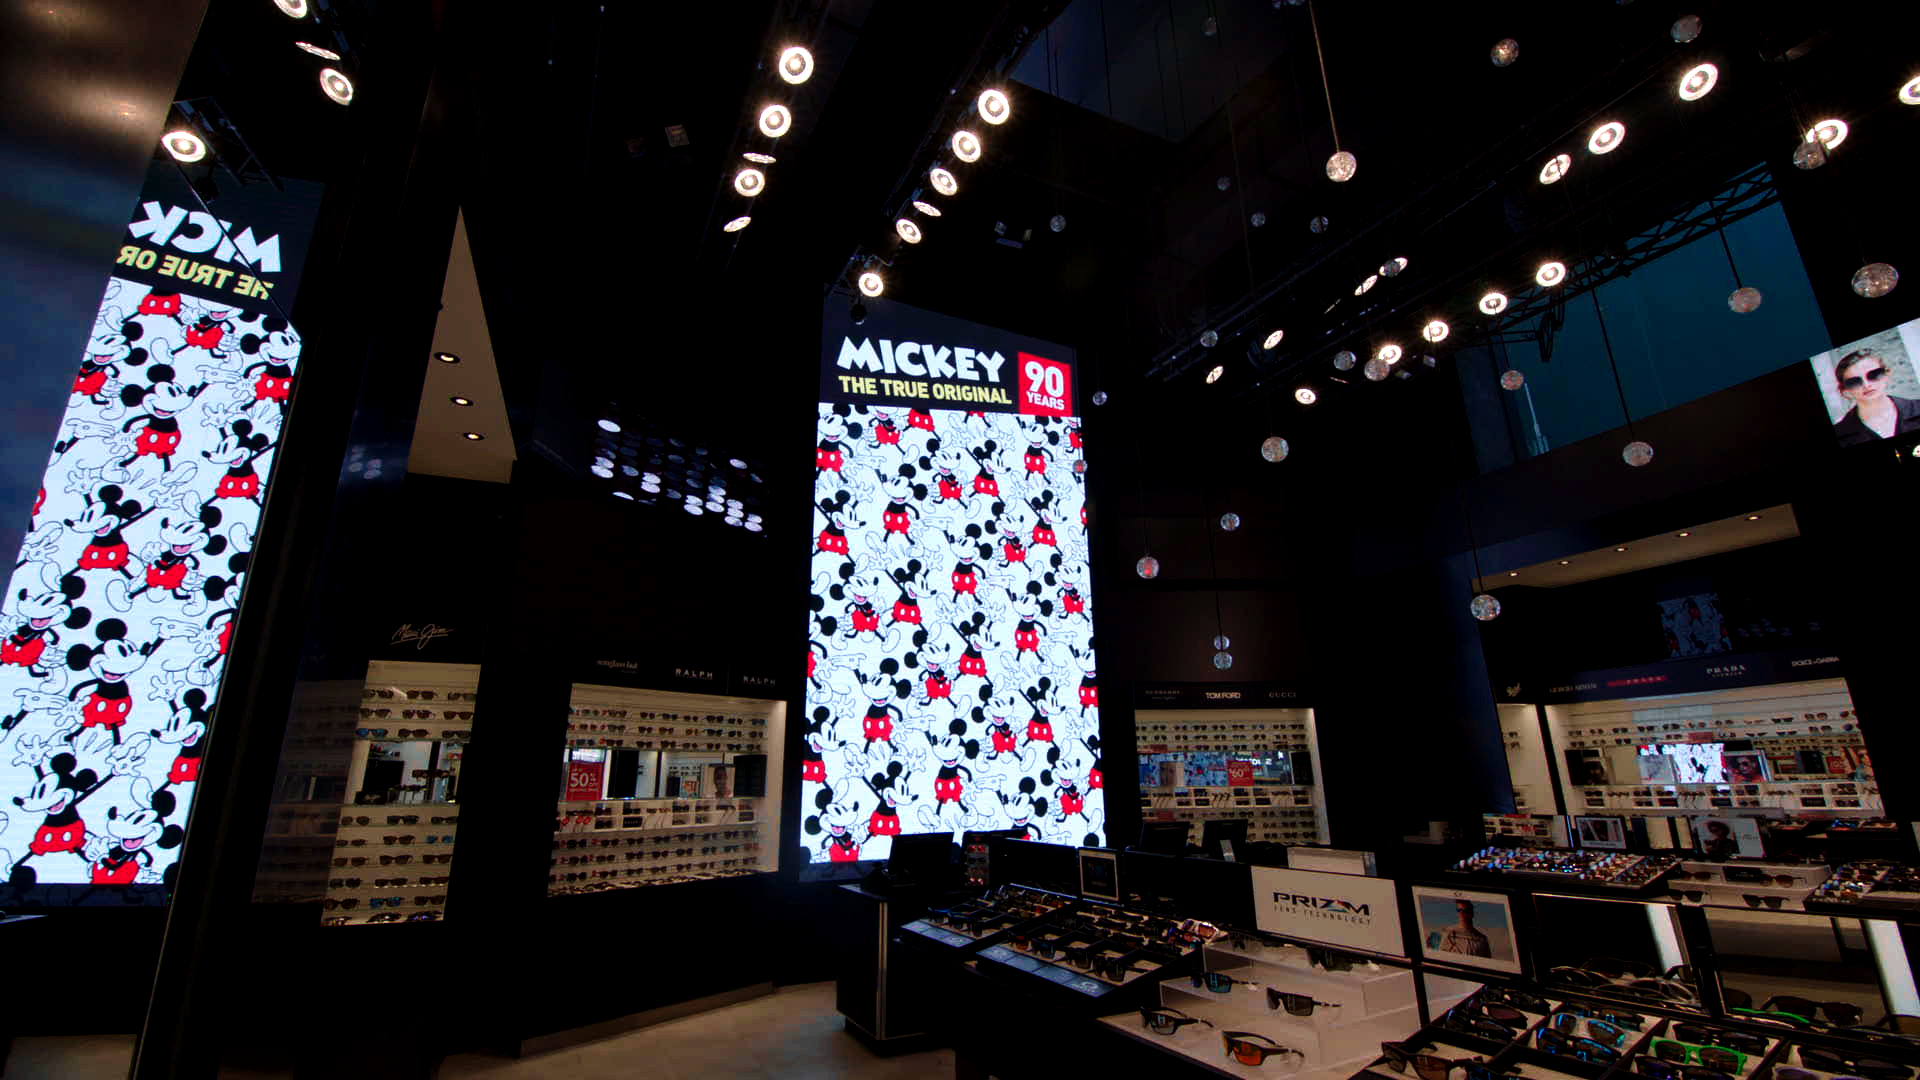 Leftchannel Motion Graphics Studio: Disney's Mickey Mouse 90th birthday celebration experiential animation Times Square